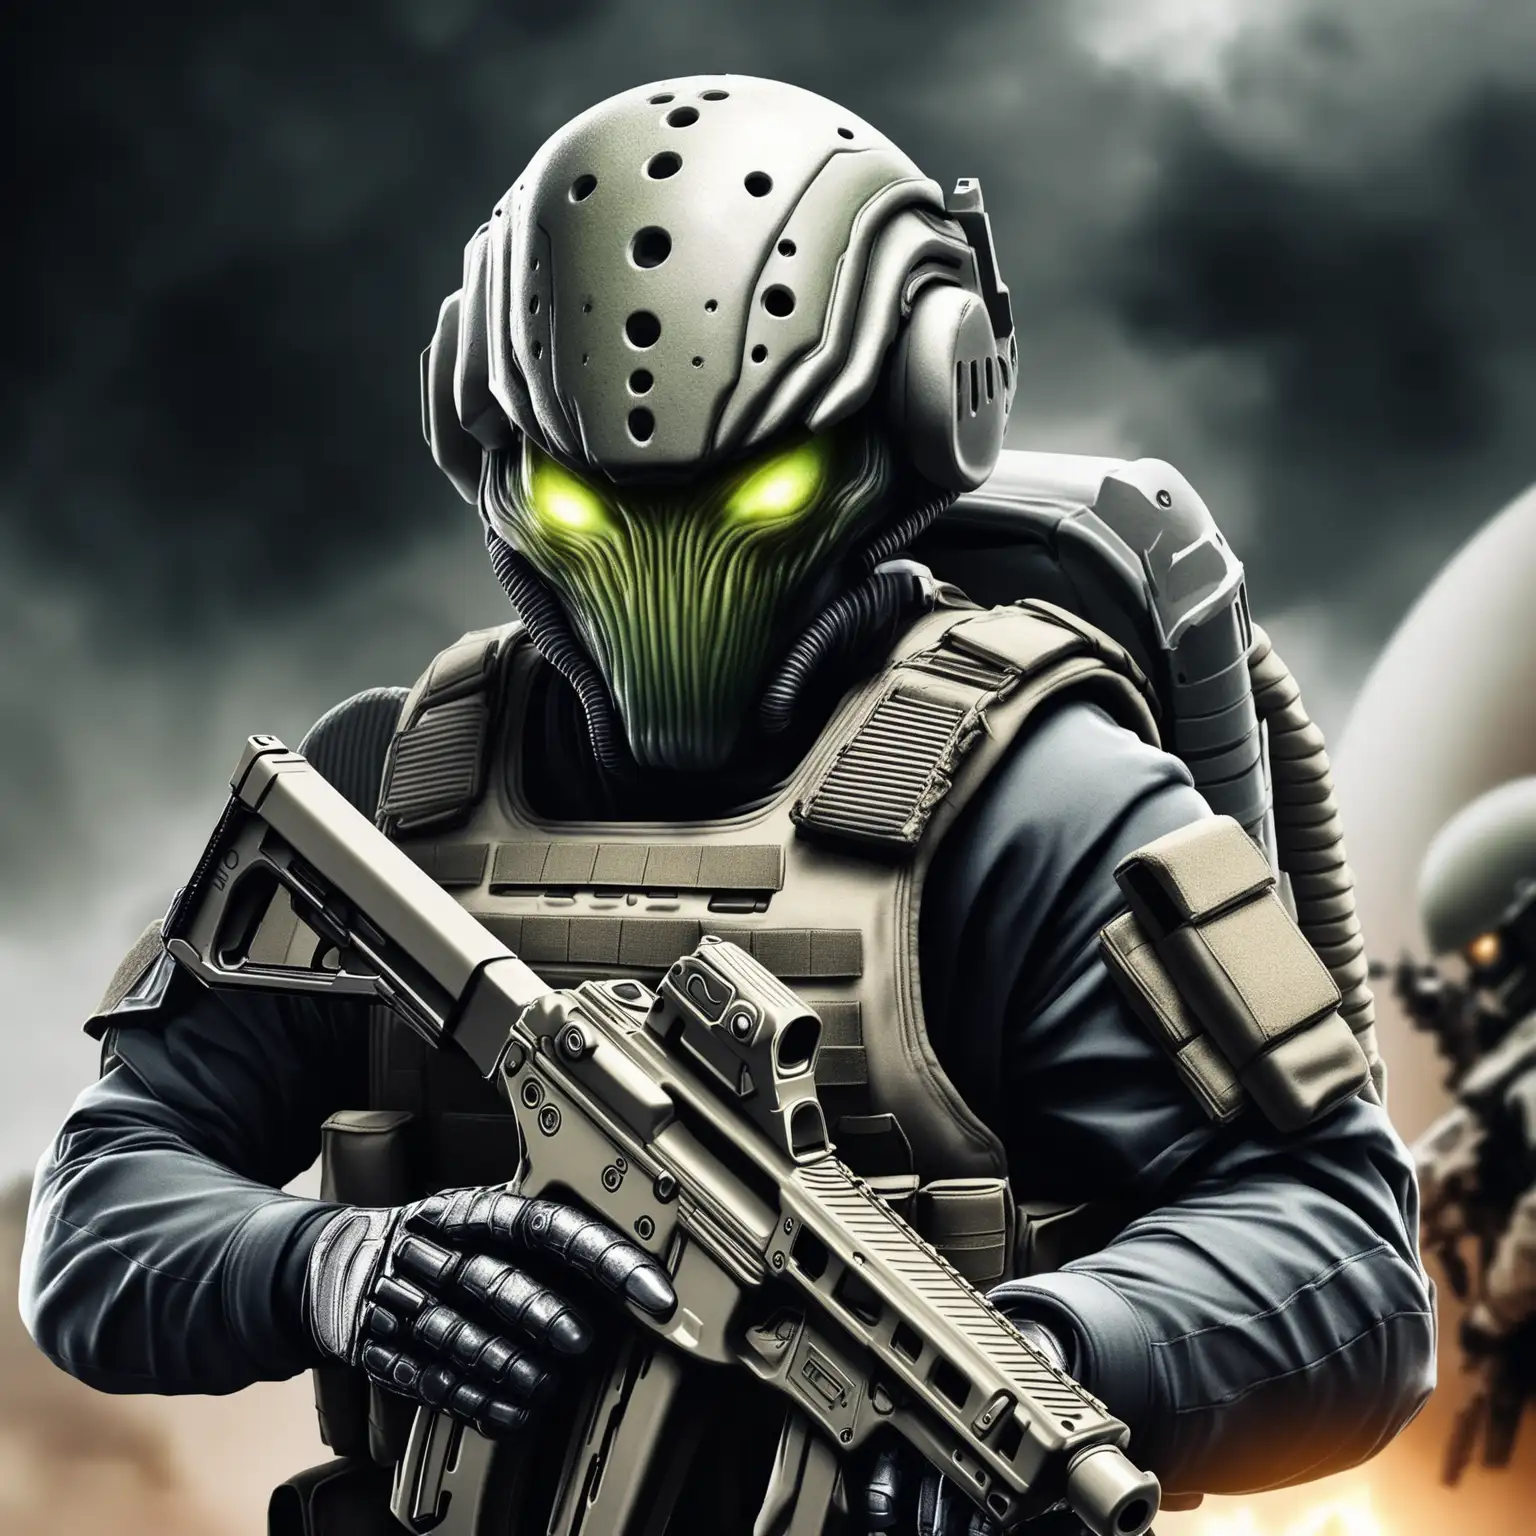 create an image of a tactical alien in war gear with a tactical helmet looking at the camera with a stern look and holding a handgun